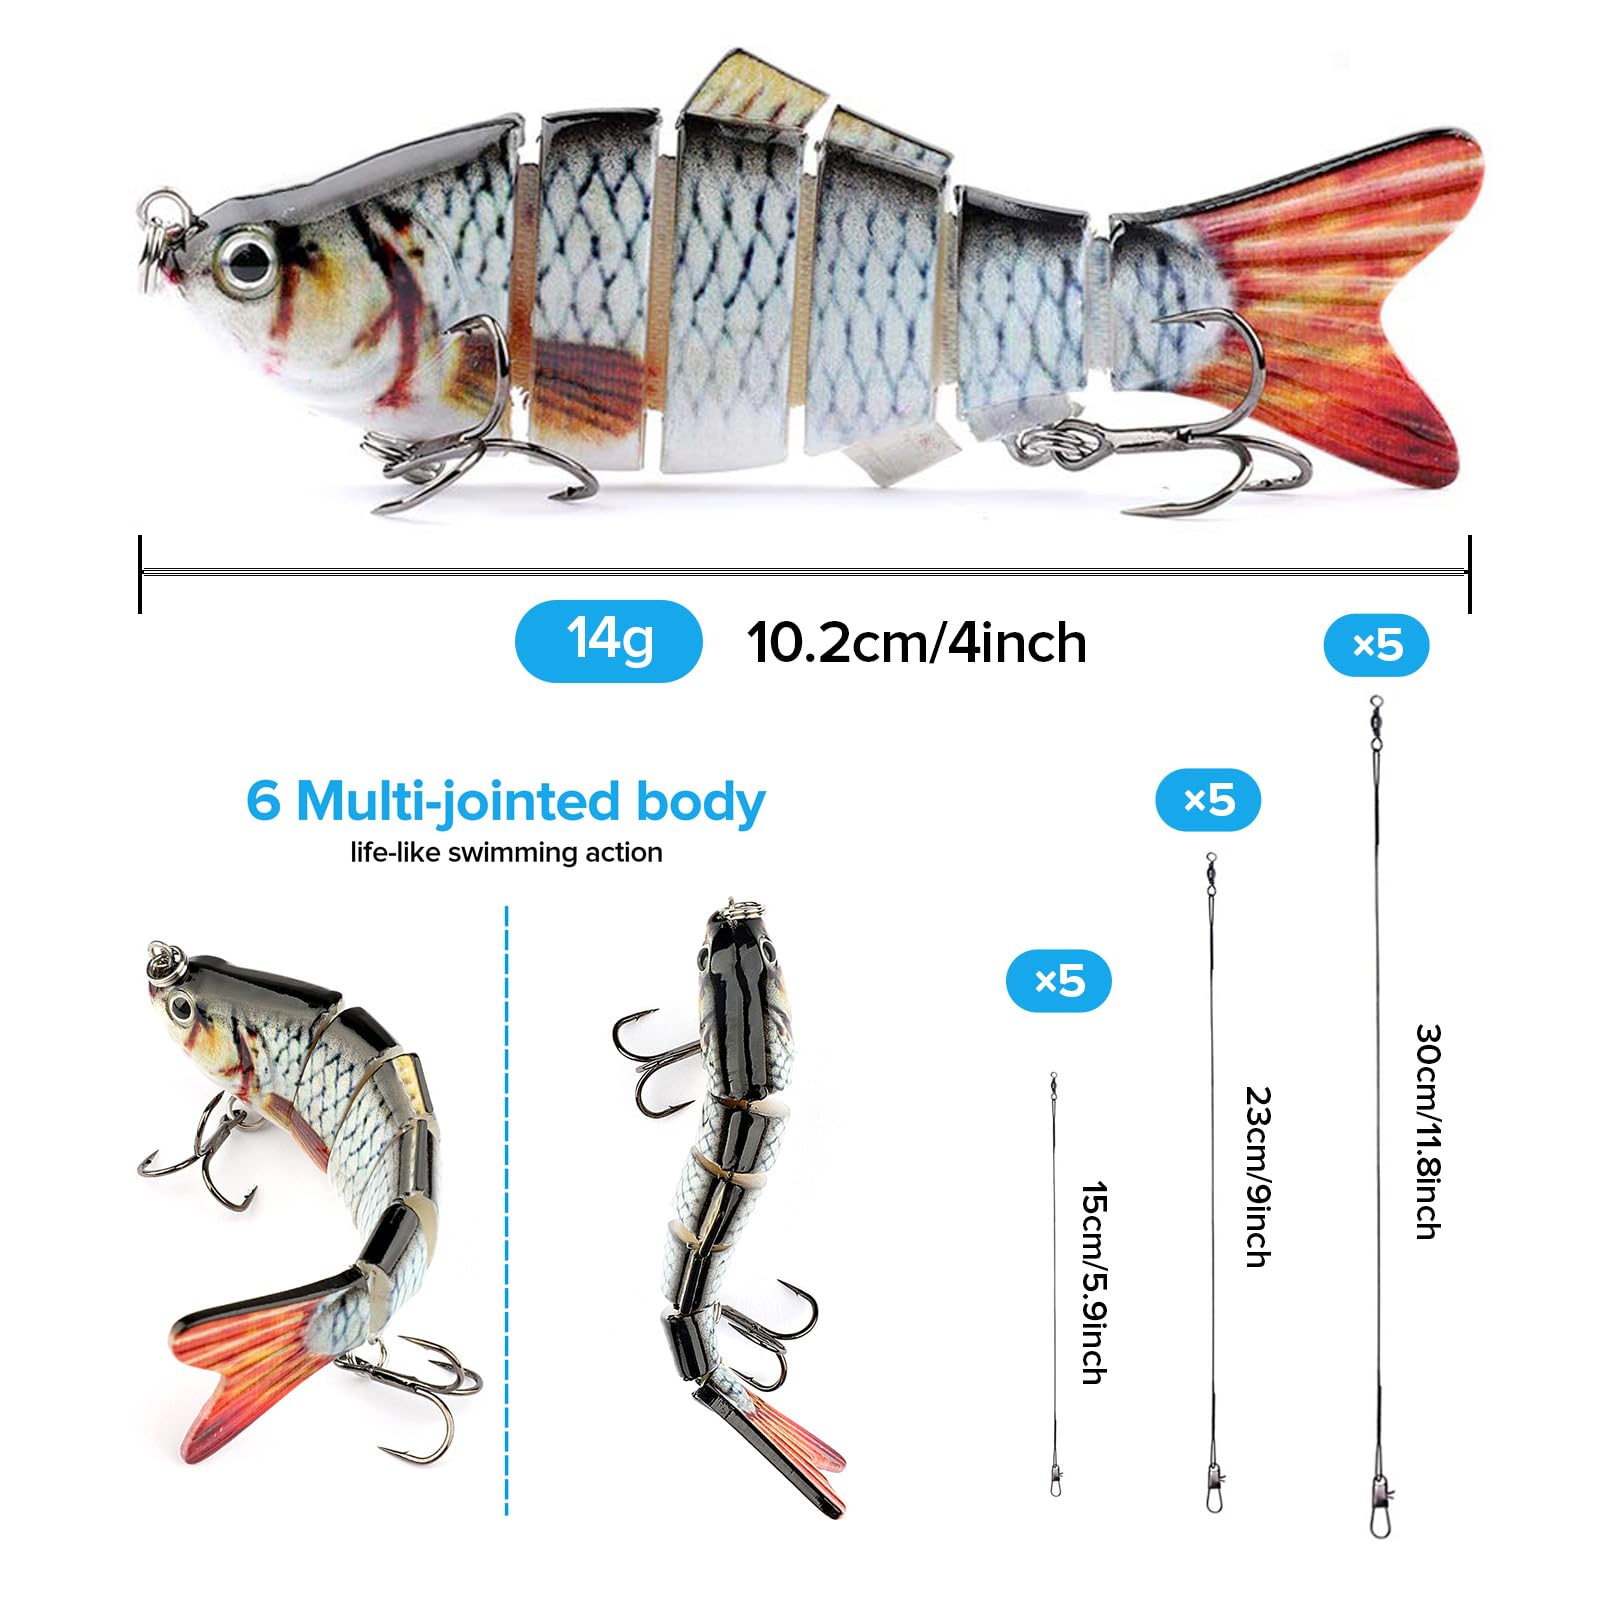 Realure 3 Pcs Multi Jointed Pike Fishing Lures with 15cm 23cm 30cm Wire Traces Pike Lures Sets 3D Artificial Lures with Hooks Slow Sinking Lure with Wobbler for Freshwater Saltwater(10.2cm 14g, B)